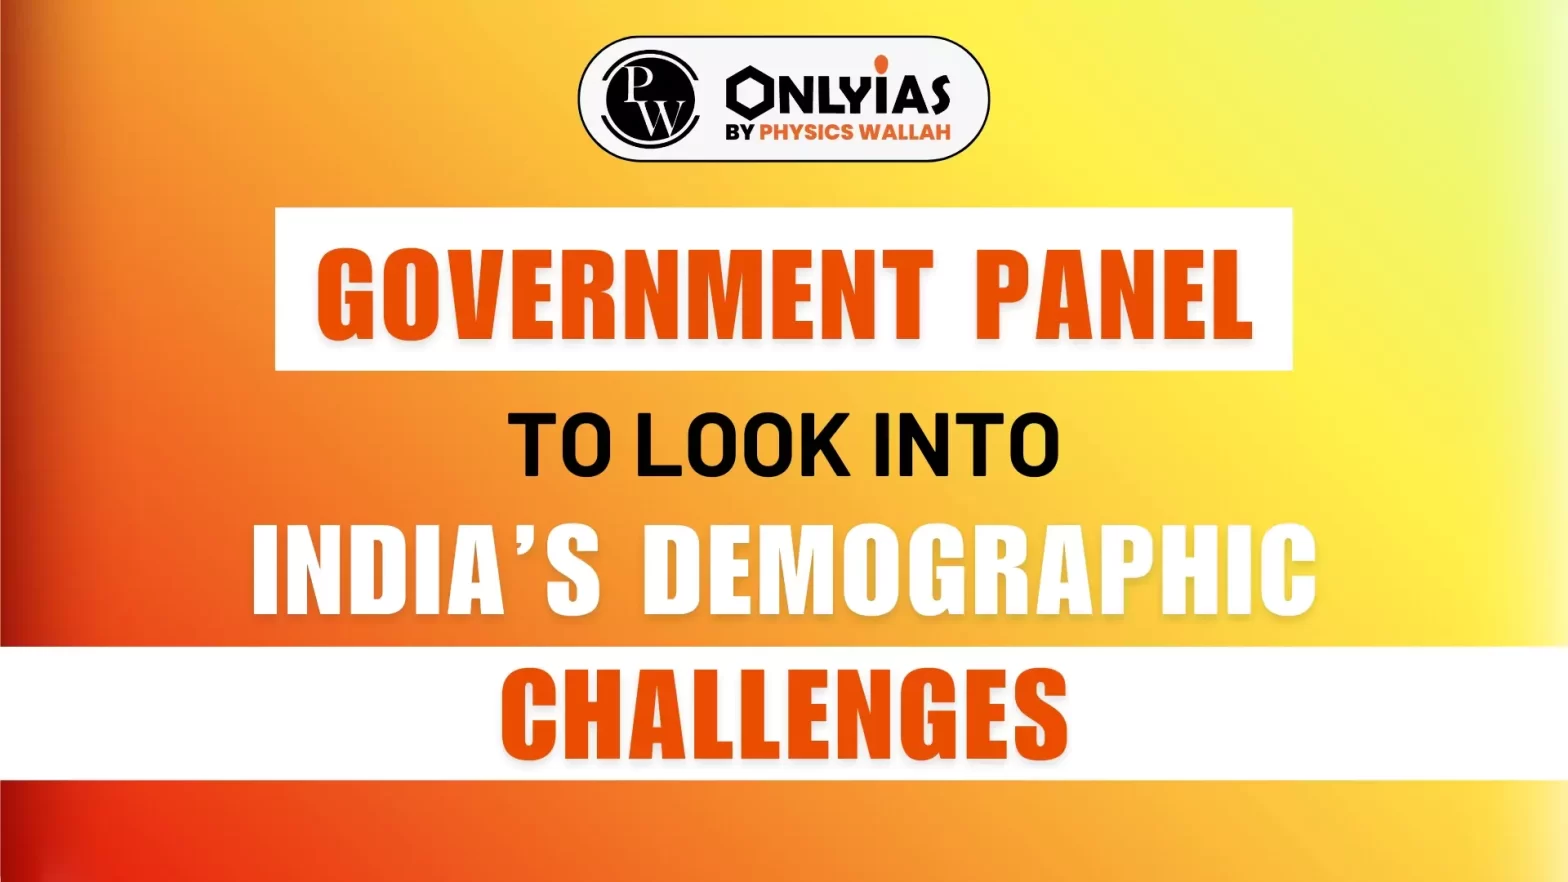 Government Panel to Look Into India’s Demographic Challenges